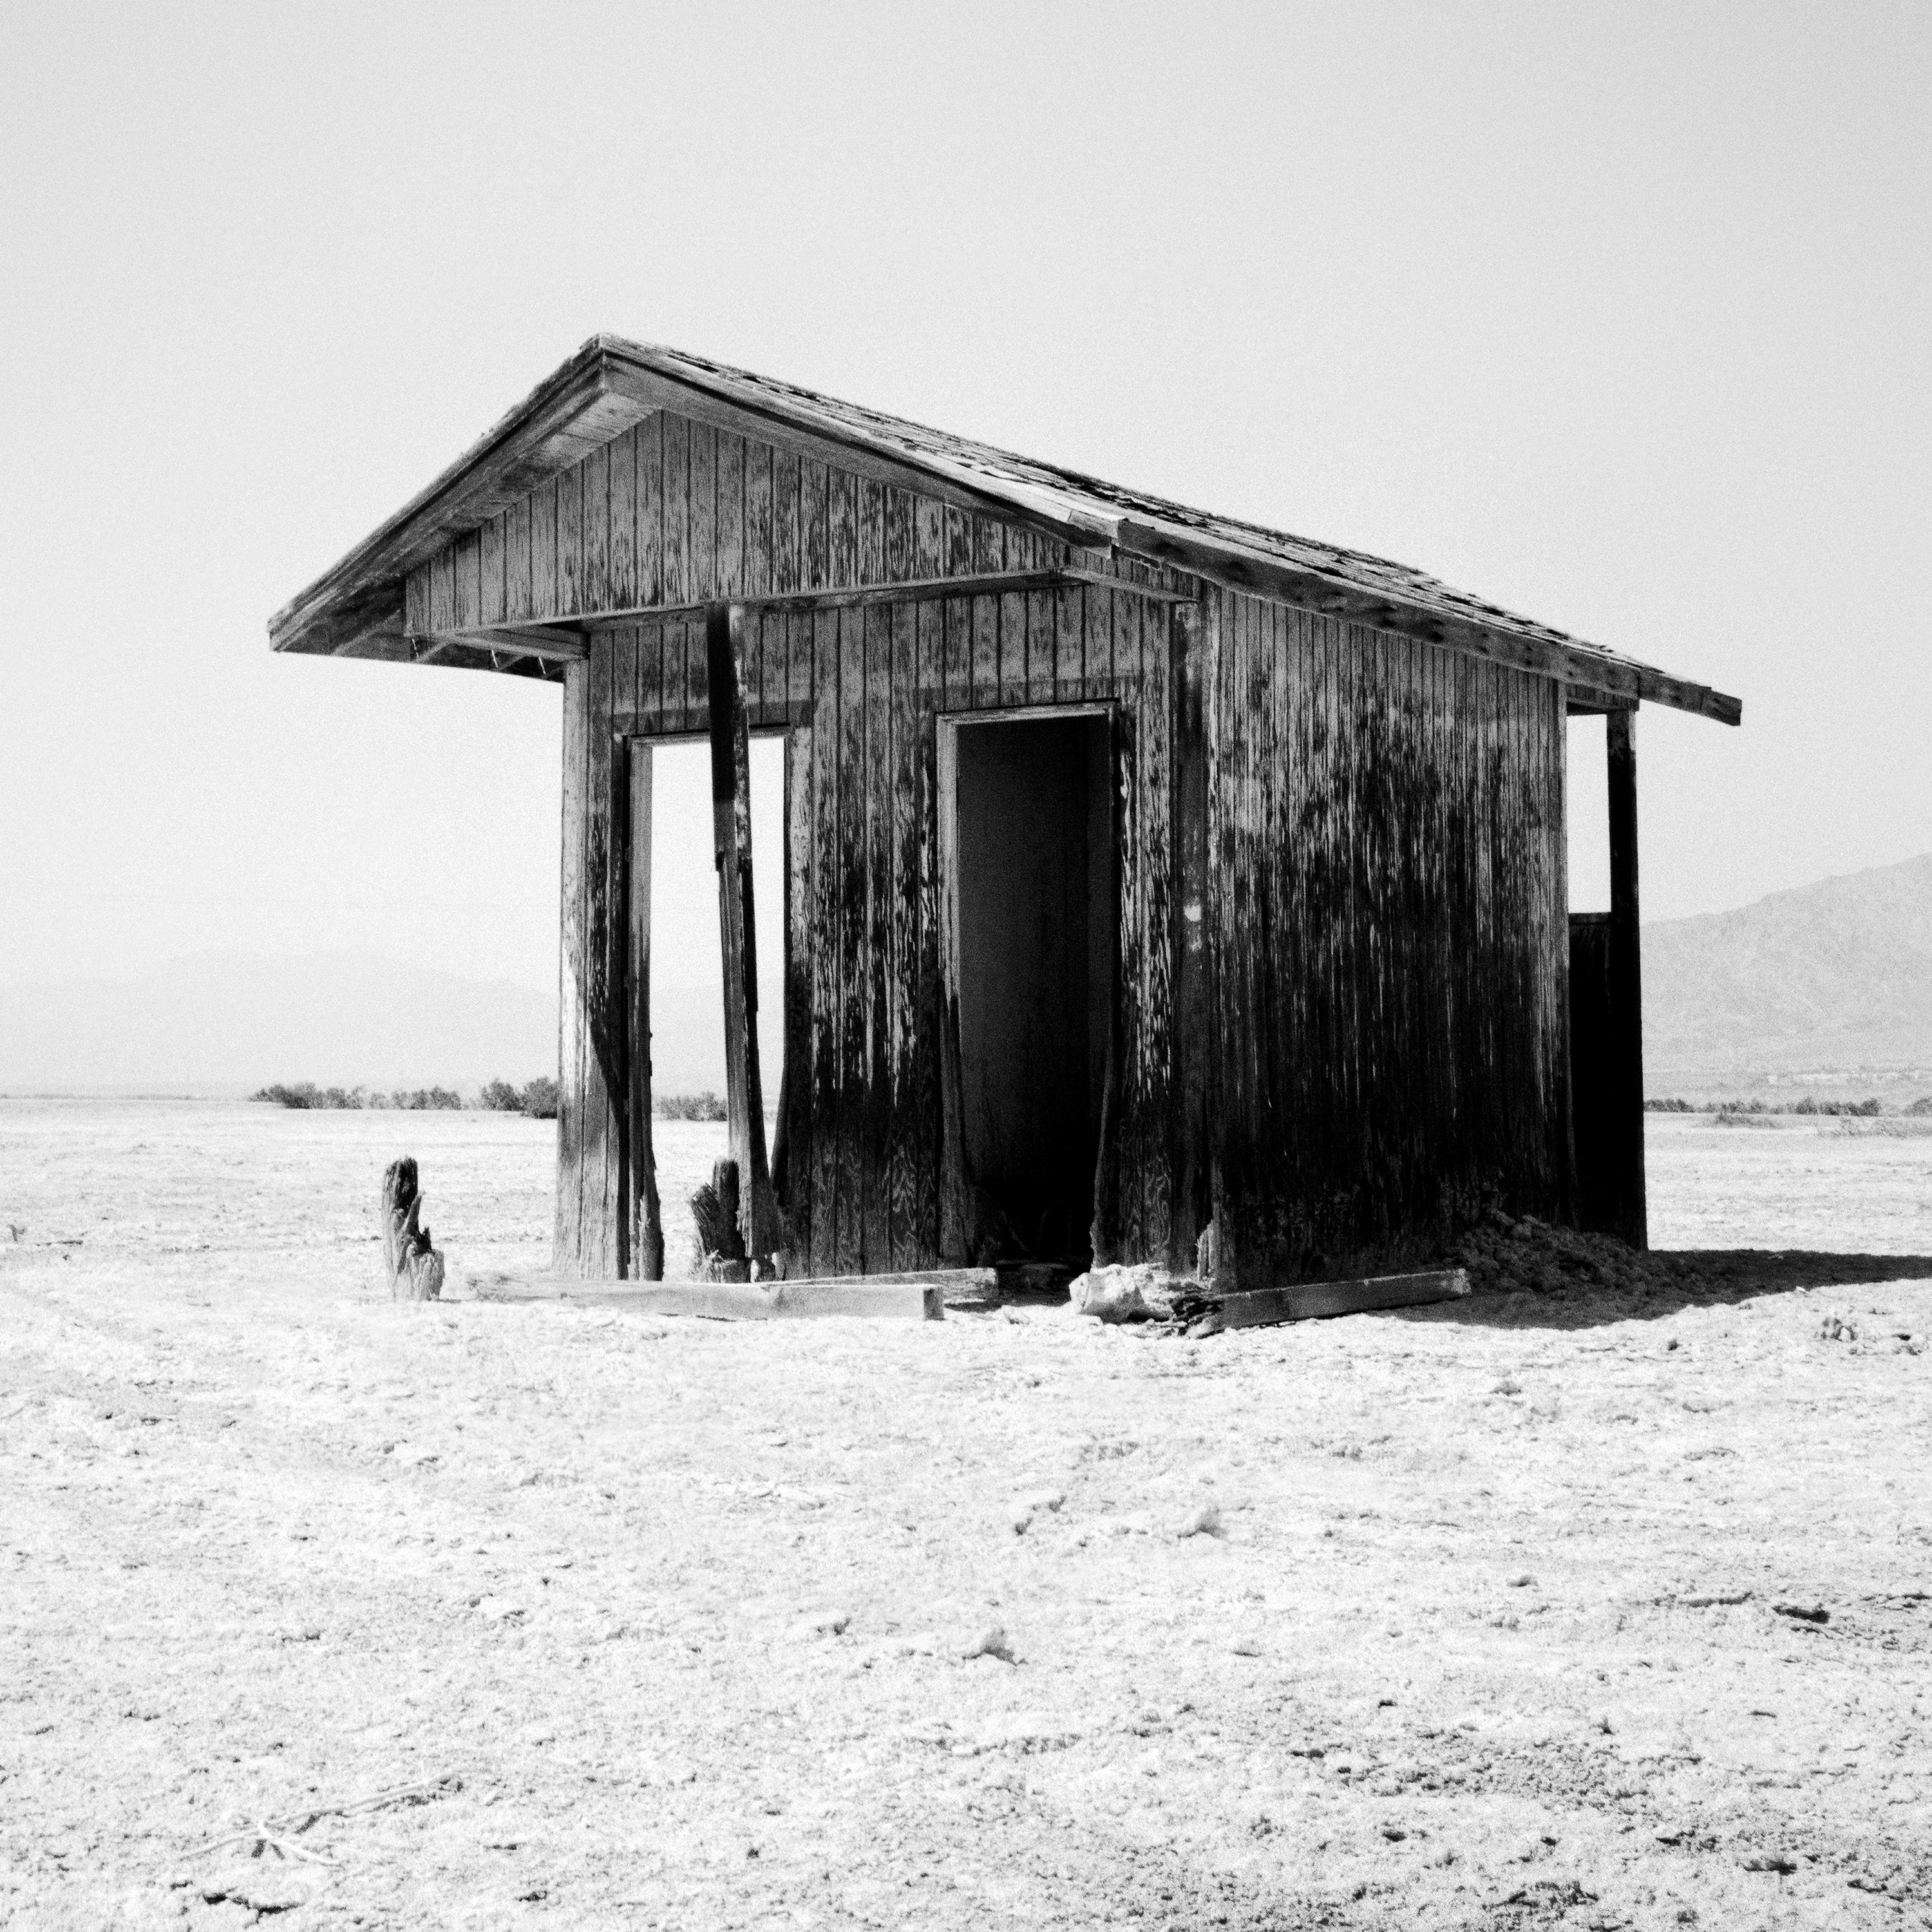 Black and White Fine Art Landscape Photography. Abandoned bath house in the desert landscape of the Salton sea, California, USA. Archival pigment ink print, edition of 9. Signed, titled, dated and numbered by artist. Certificate of authenticity